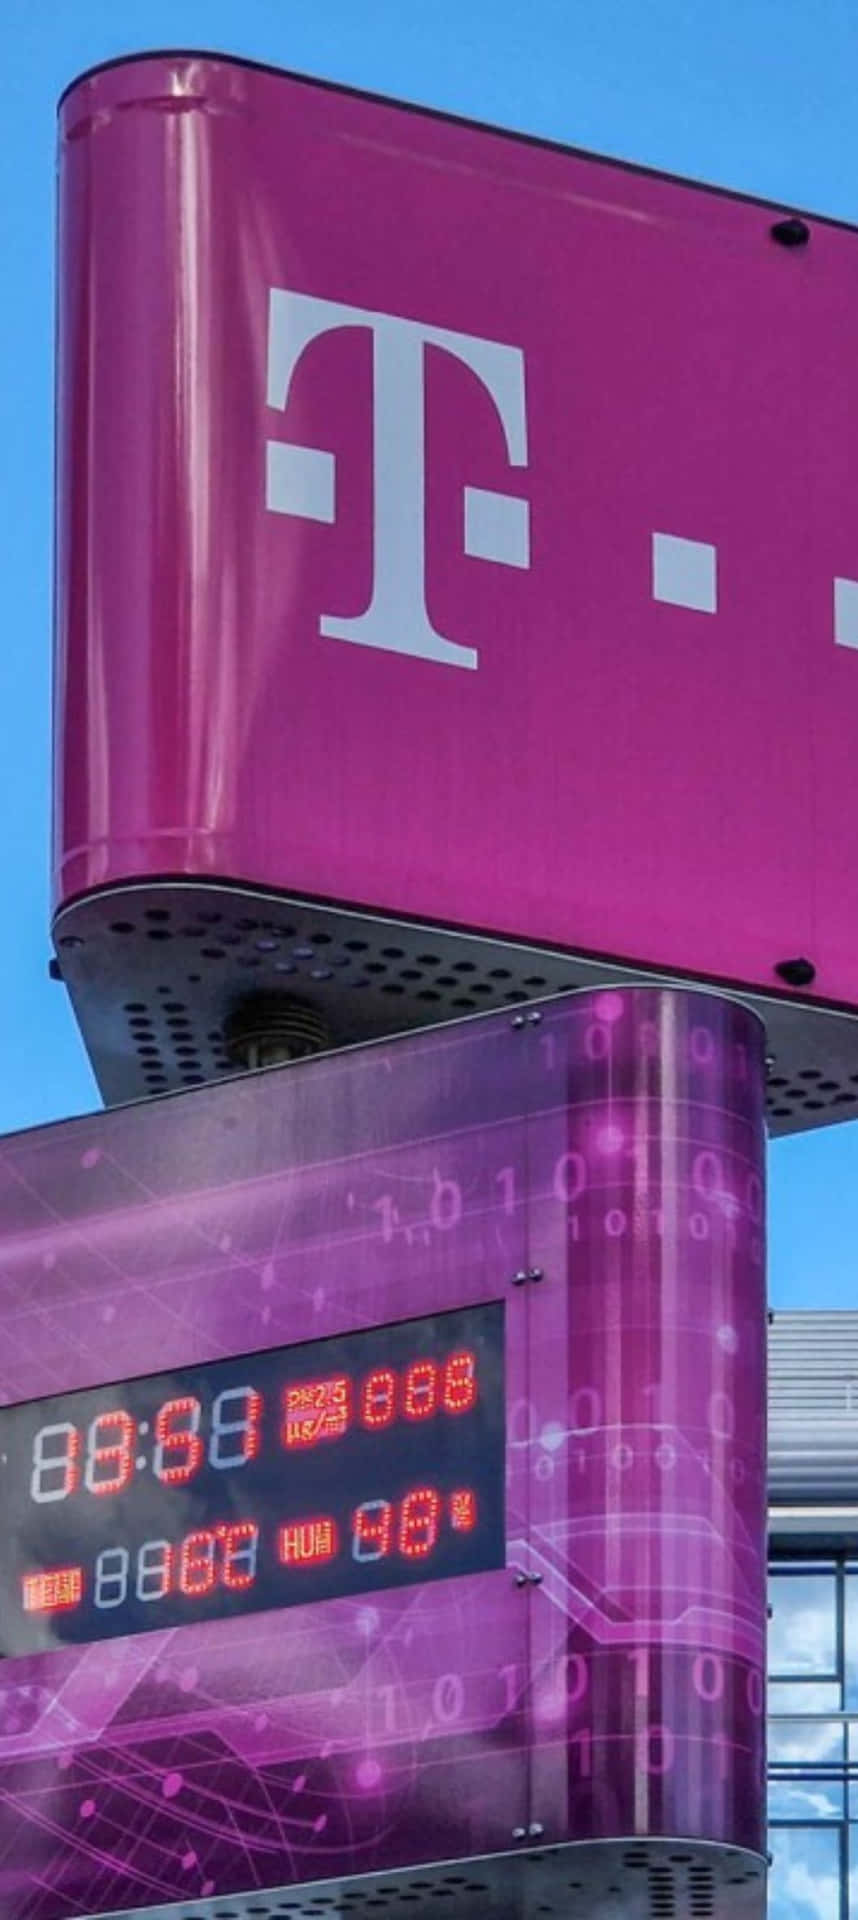 T Mobile Branded Structure Display Wallpaper